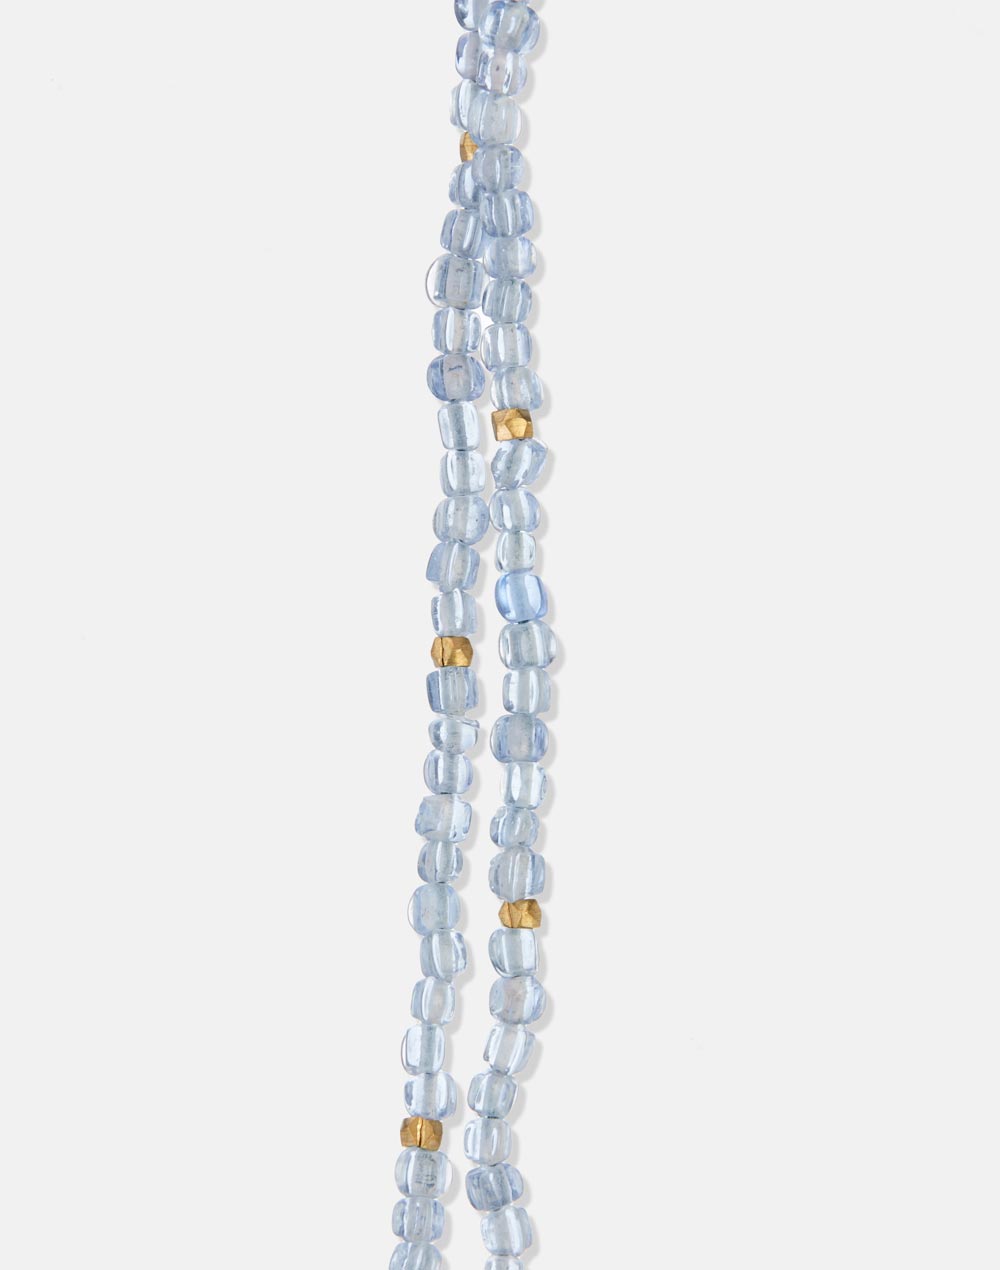 Glass Beads Blue Necklace